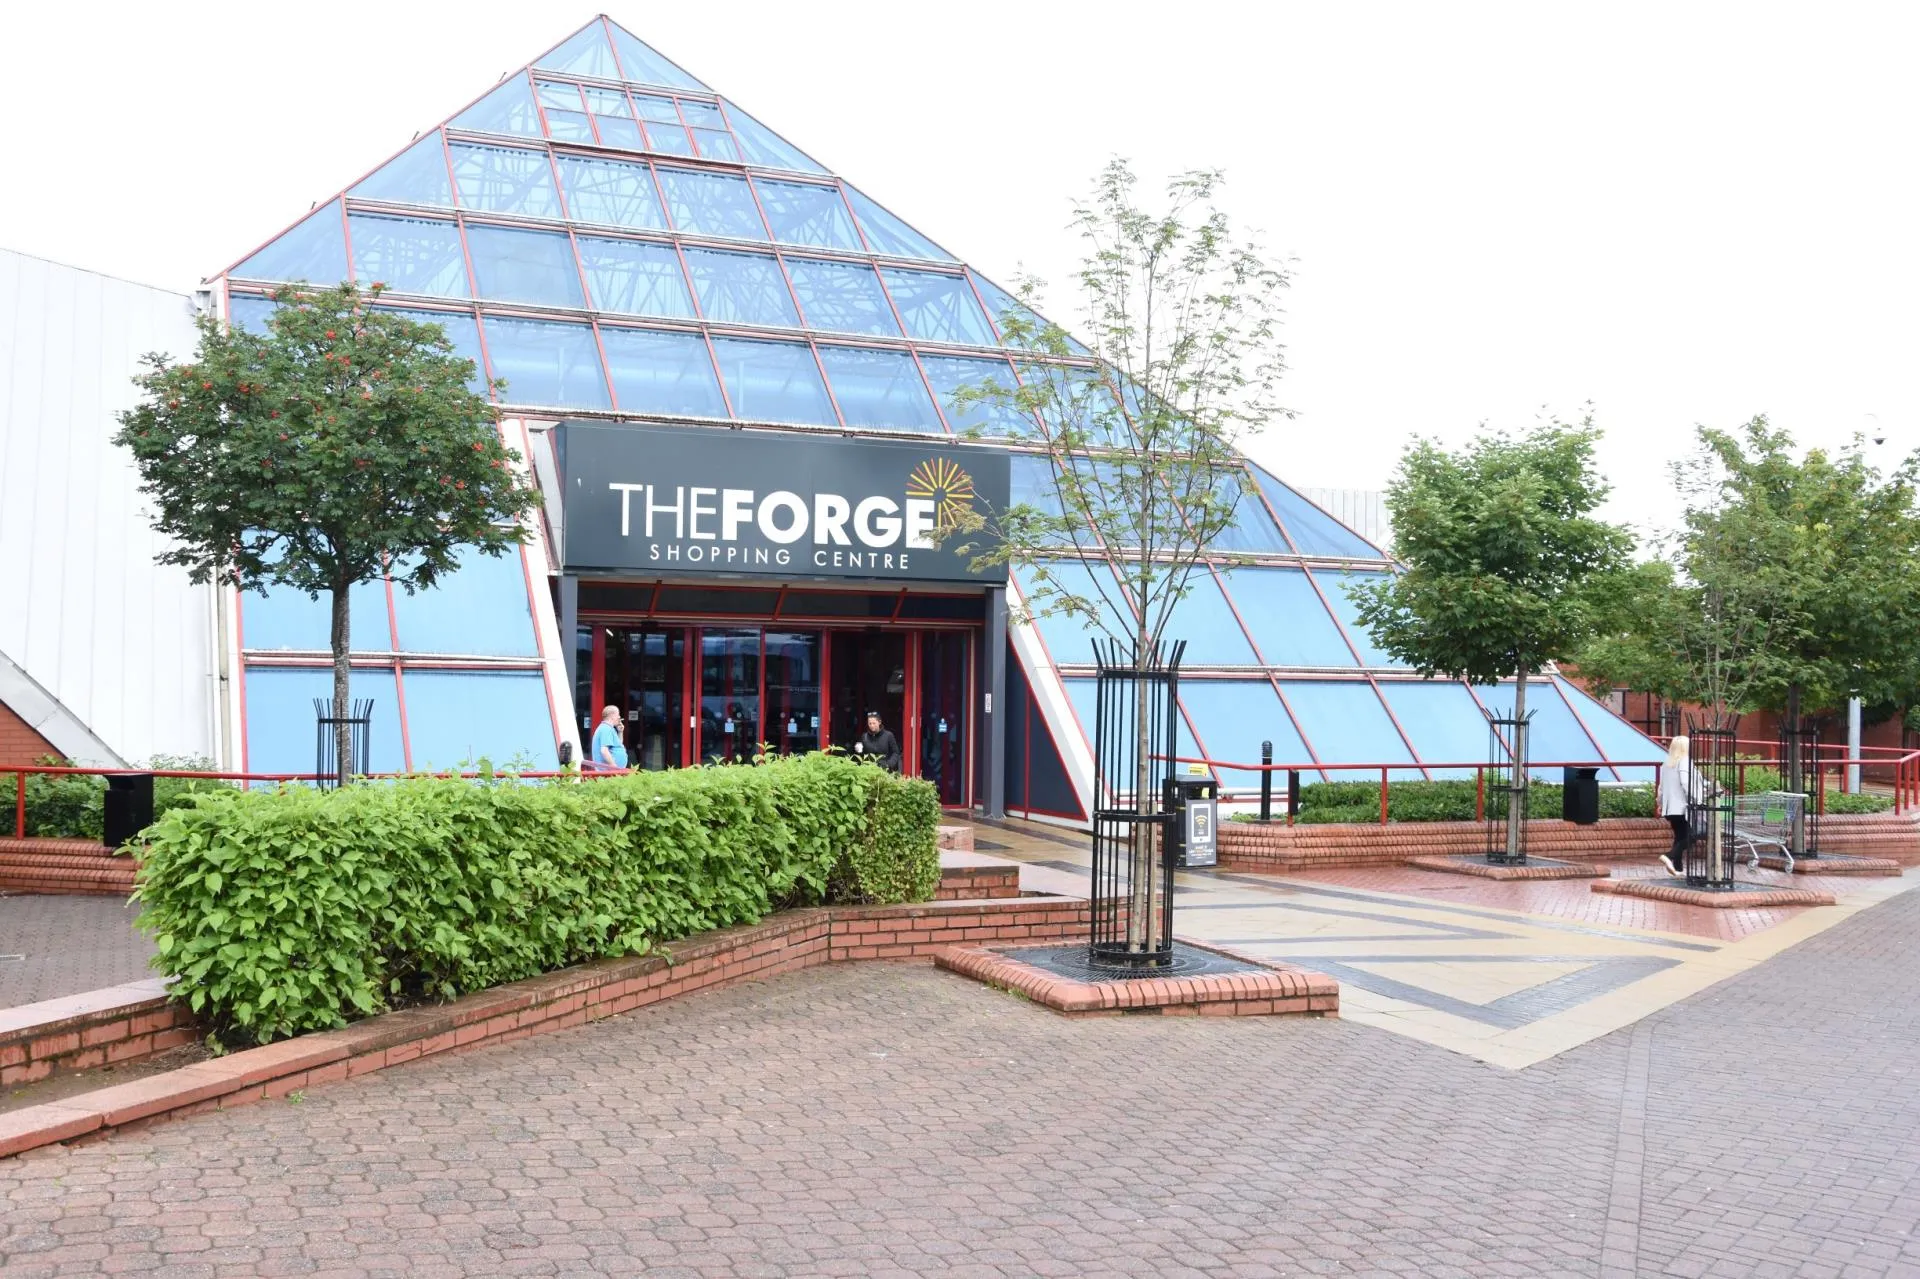 The Forge Shopping Centre in United Kingdom, europe | Handbags,Shoes,Accessories,Clothes,Home Decor,Cosmetics,Swimwear - Country Helper